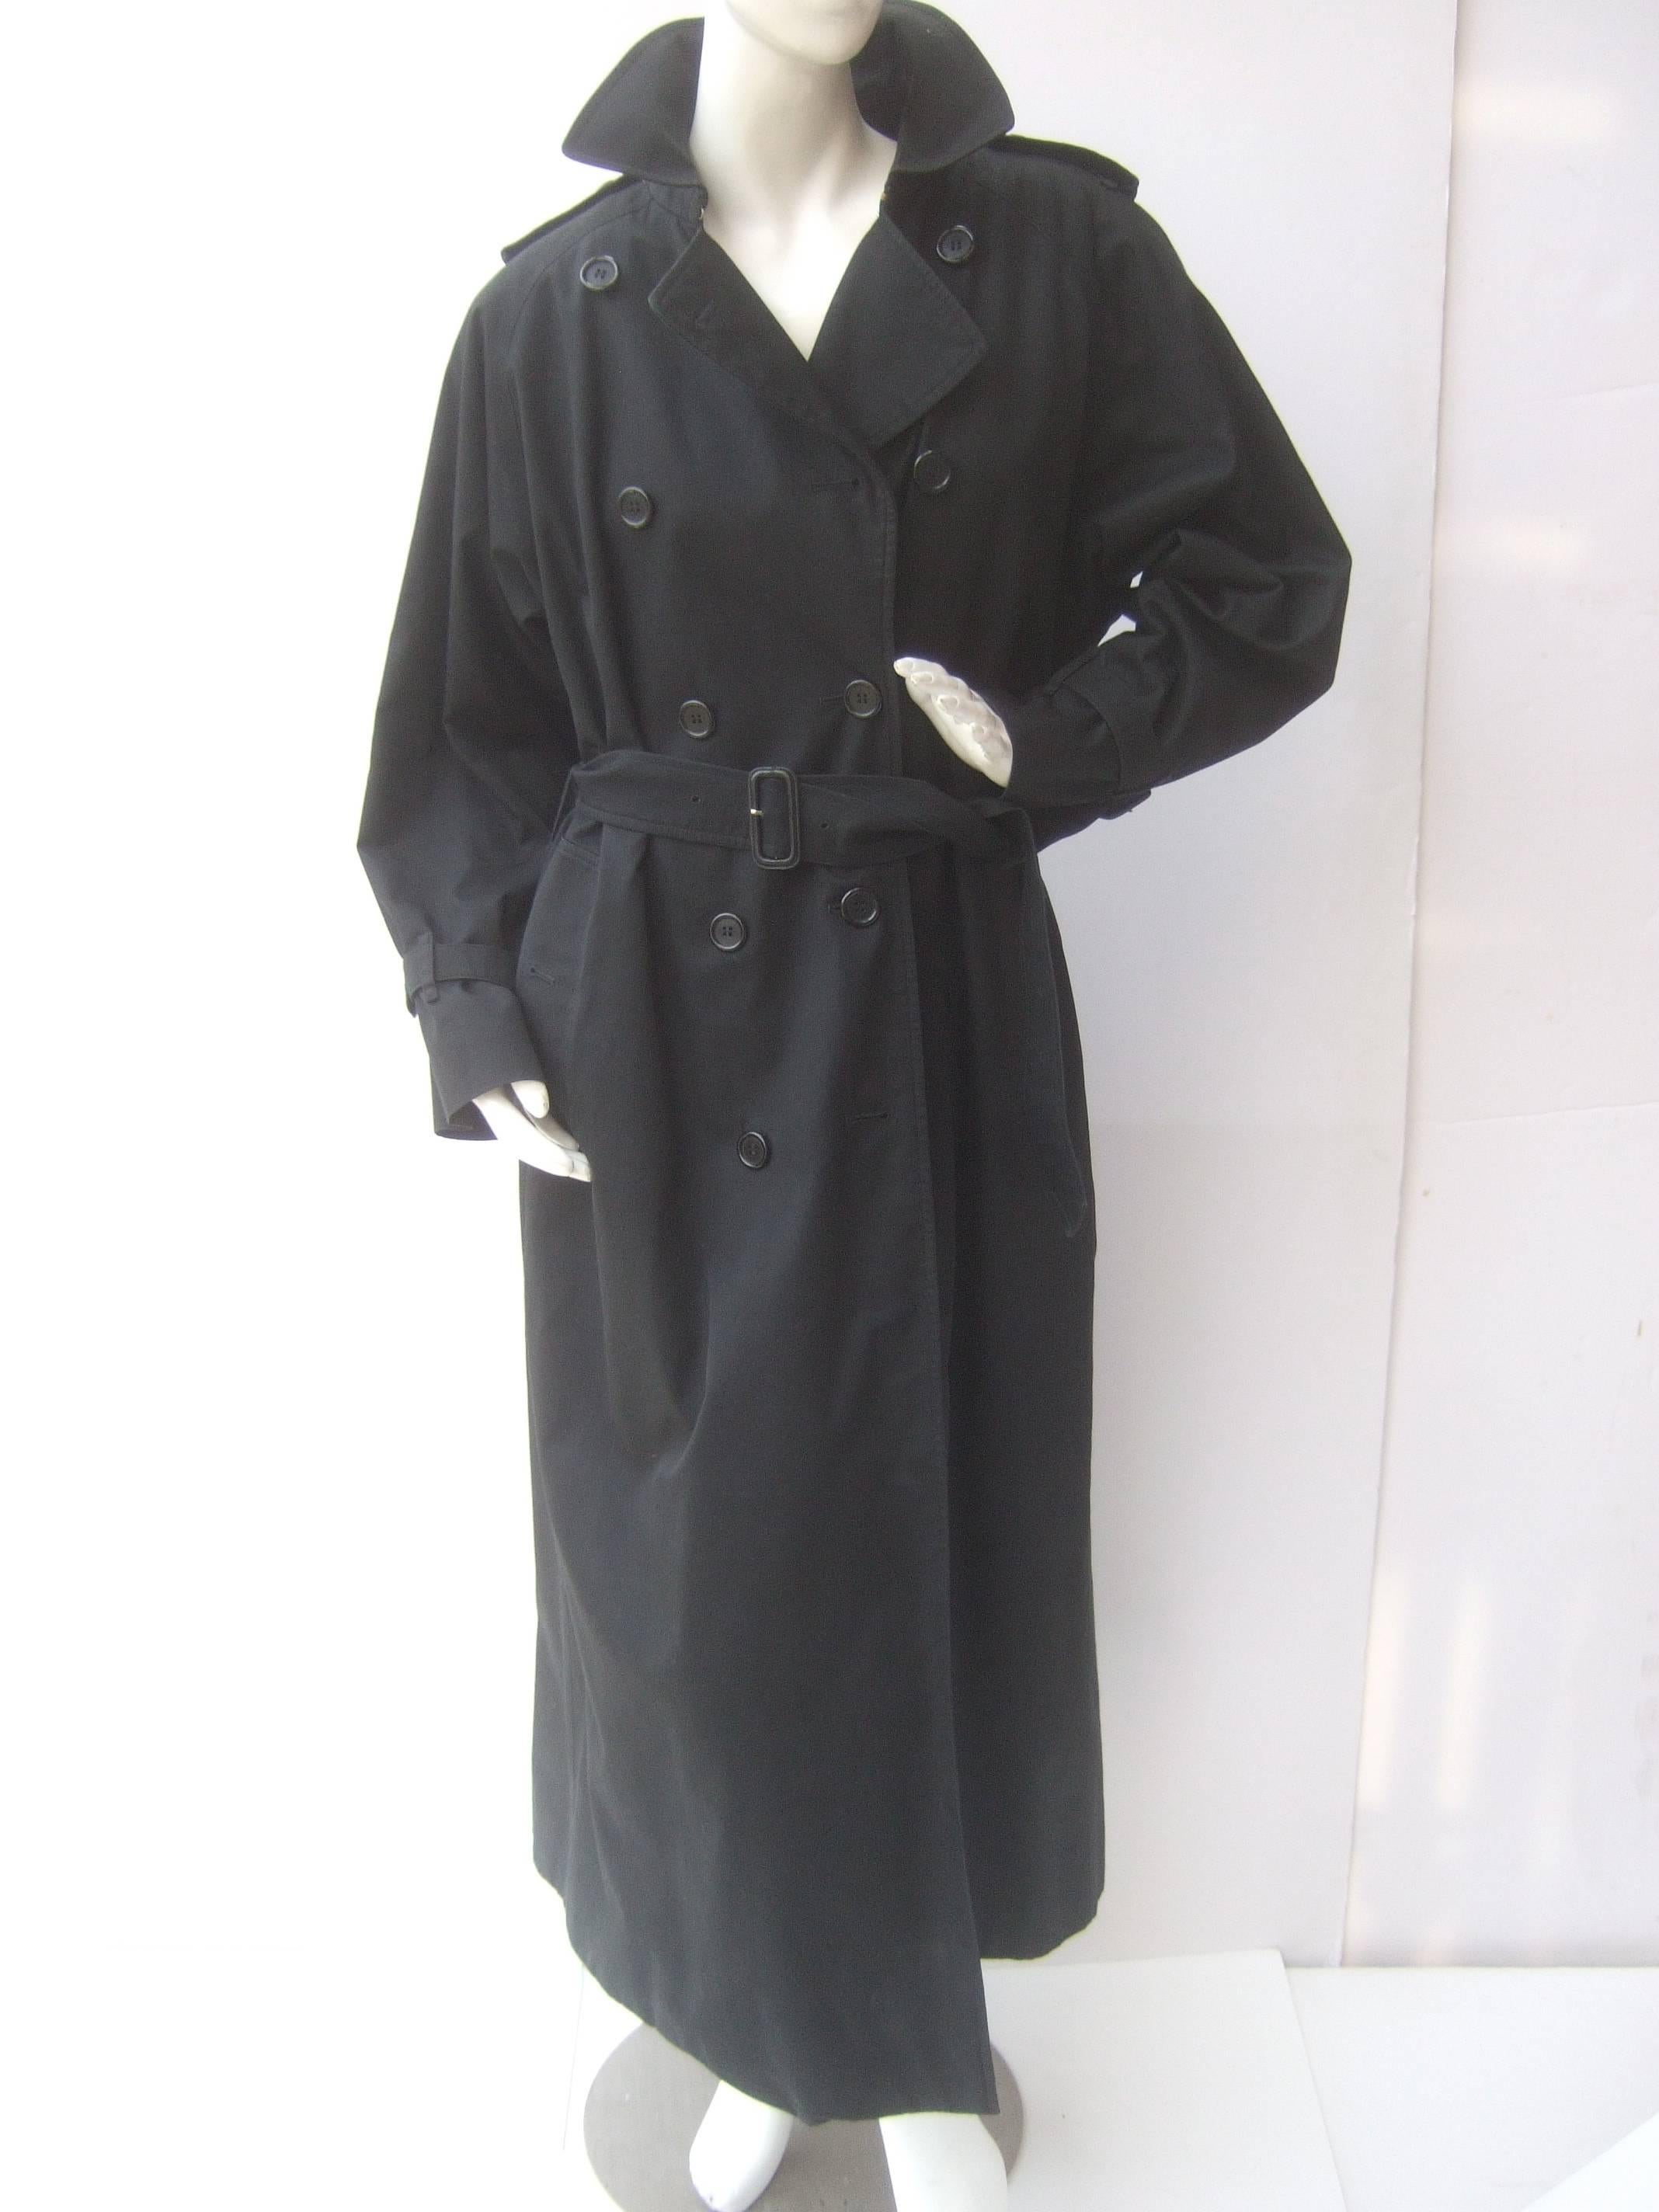 Burberry's Prorsum Vintage Women's Black Belted Trench Coach Size 10 X X Long 4